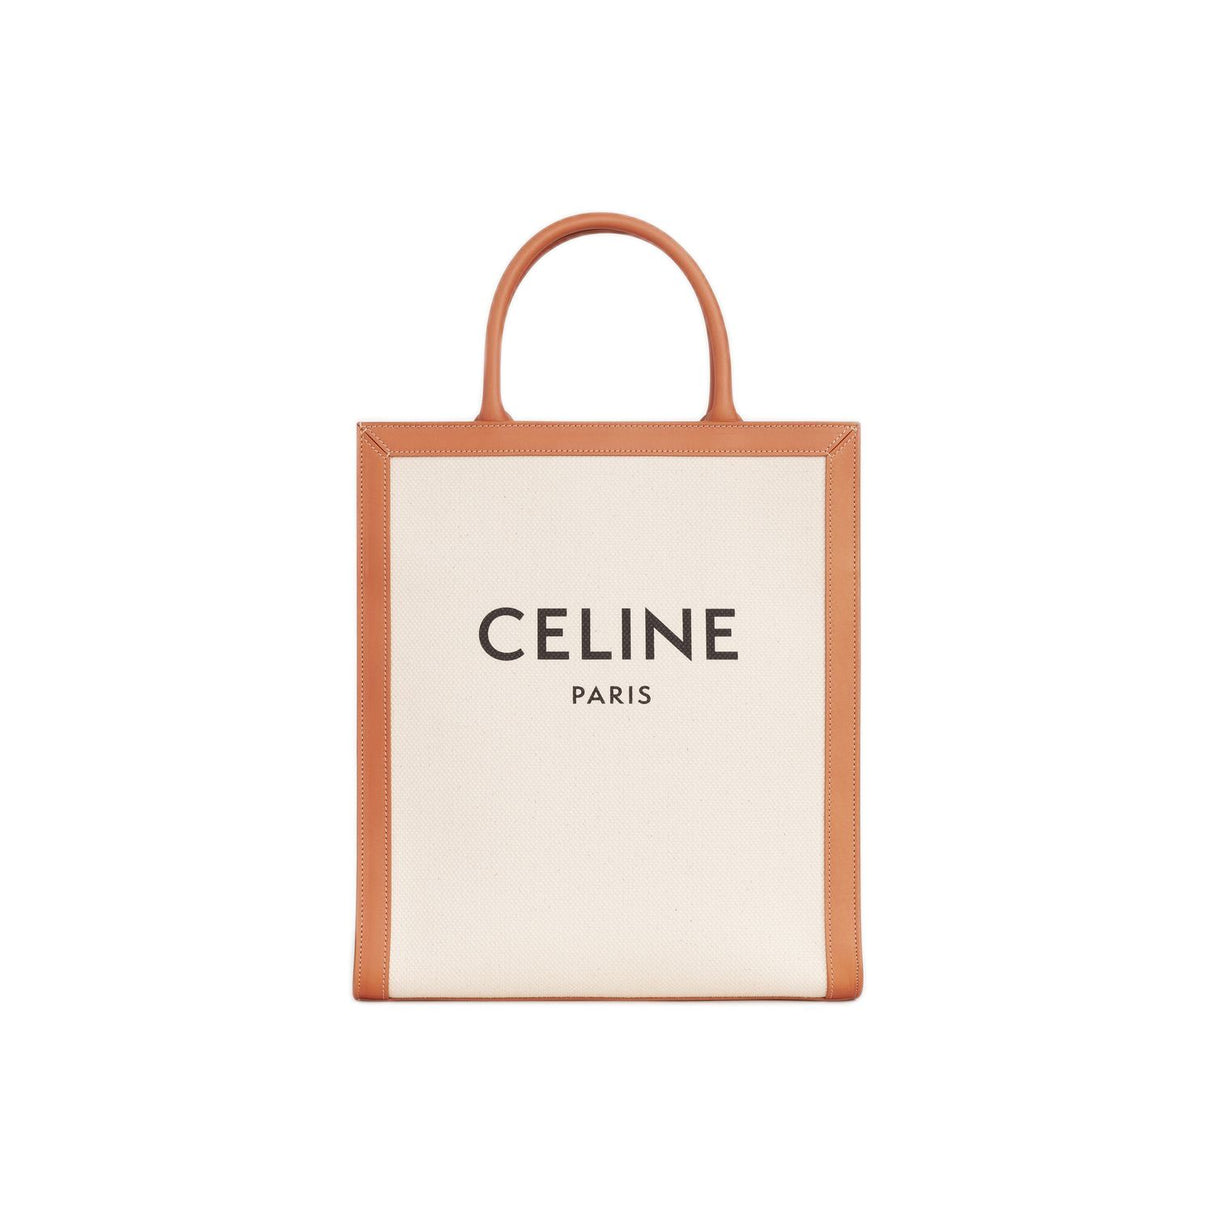 CELINE Tan Vertical Small Tote - 100% Cotton with Genuine Leather Accents, Women's Fall/Winter Collection